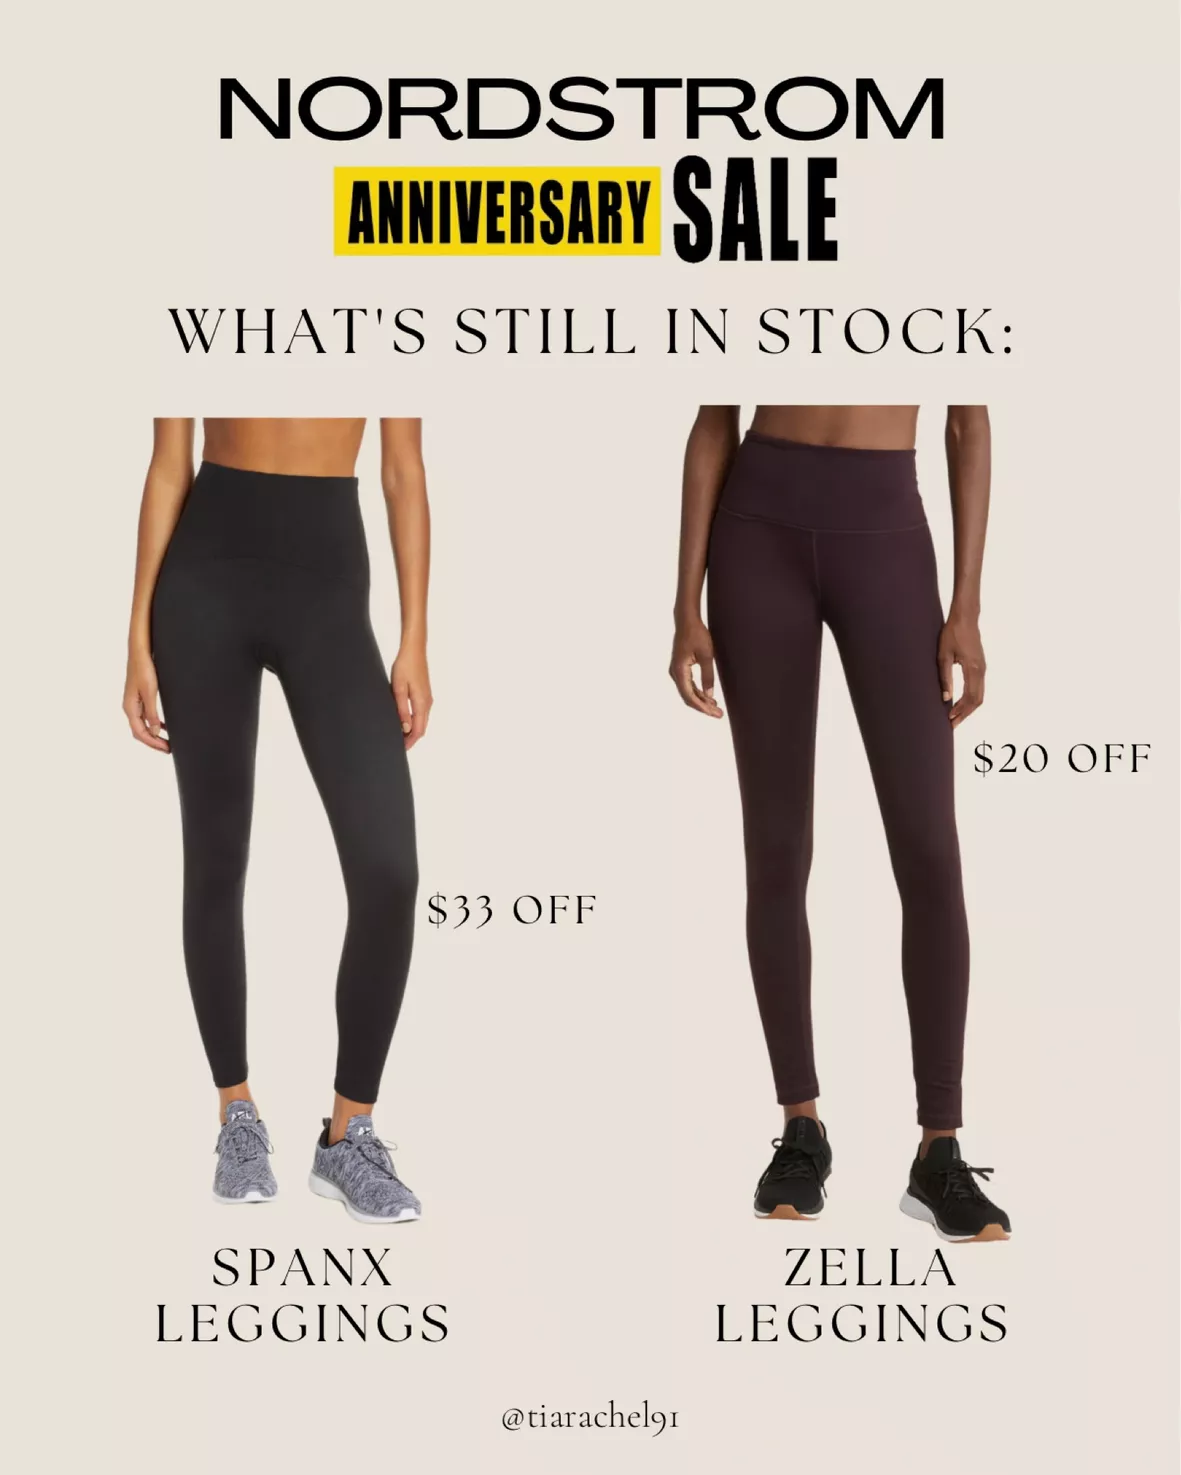 Zella leggings: Shop the Nordstrom Anniversary Sale to save on these pants